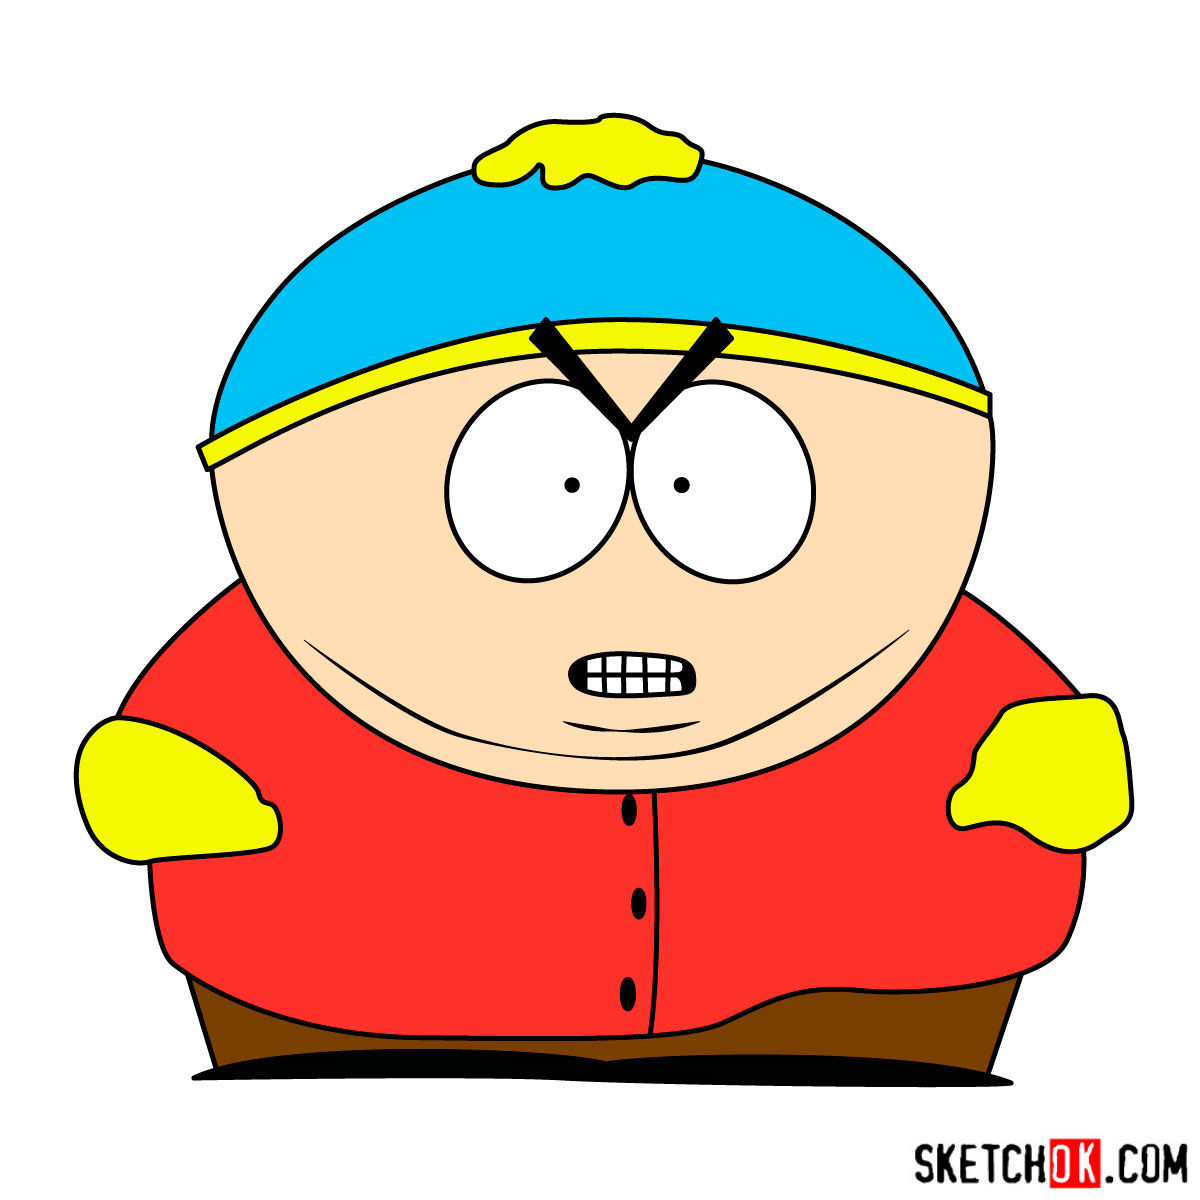 No "Cartman_GoToHell" memes have been featured yet. 